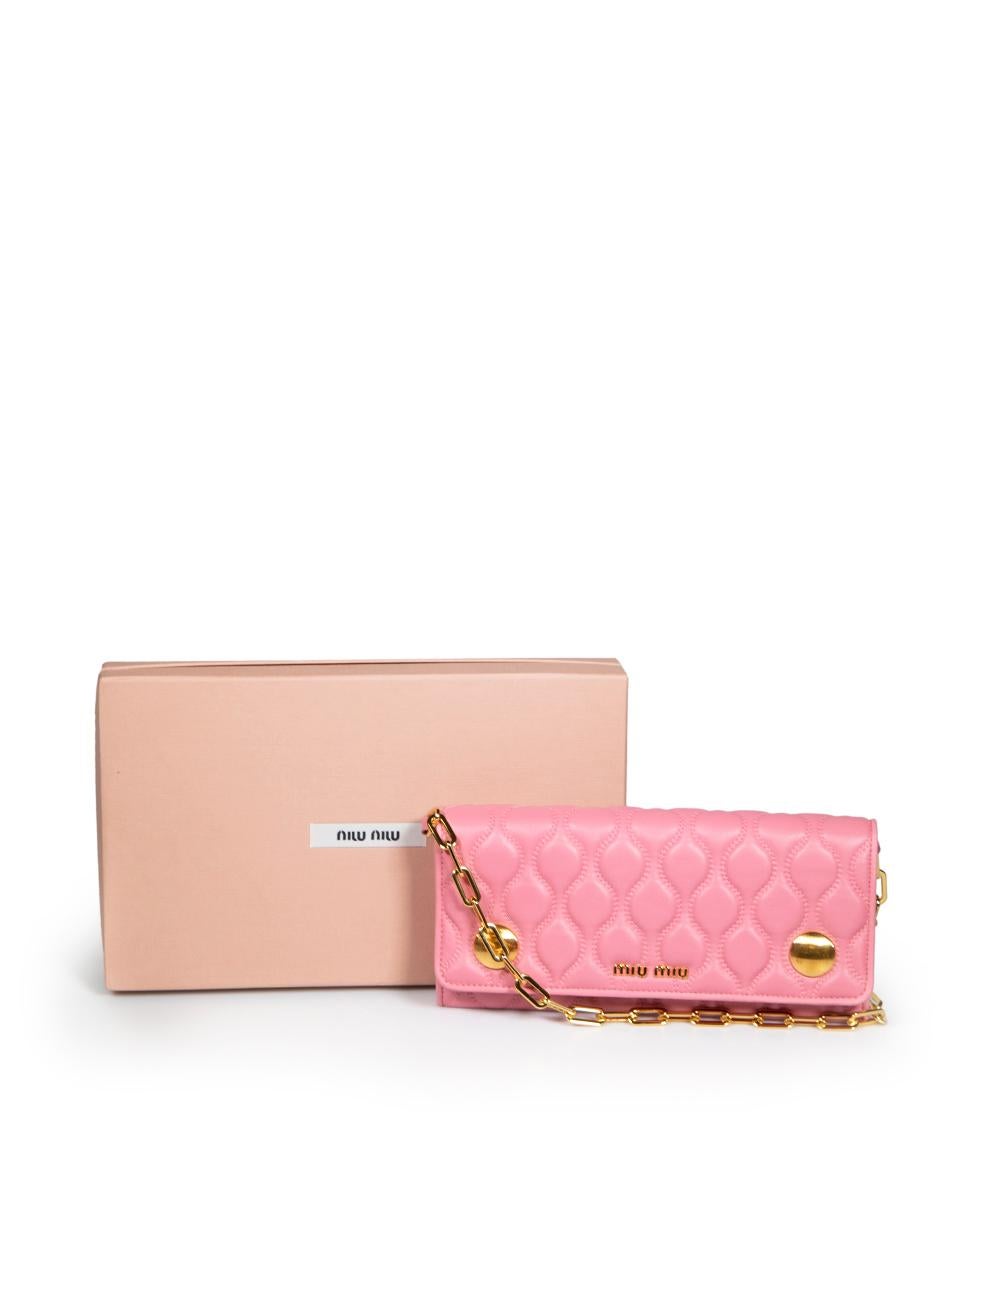 Miu Miu Pink Leather Quilted Wallet on Chain For Sale 2